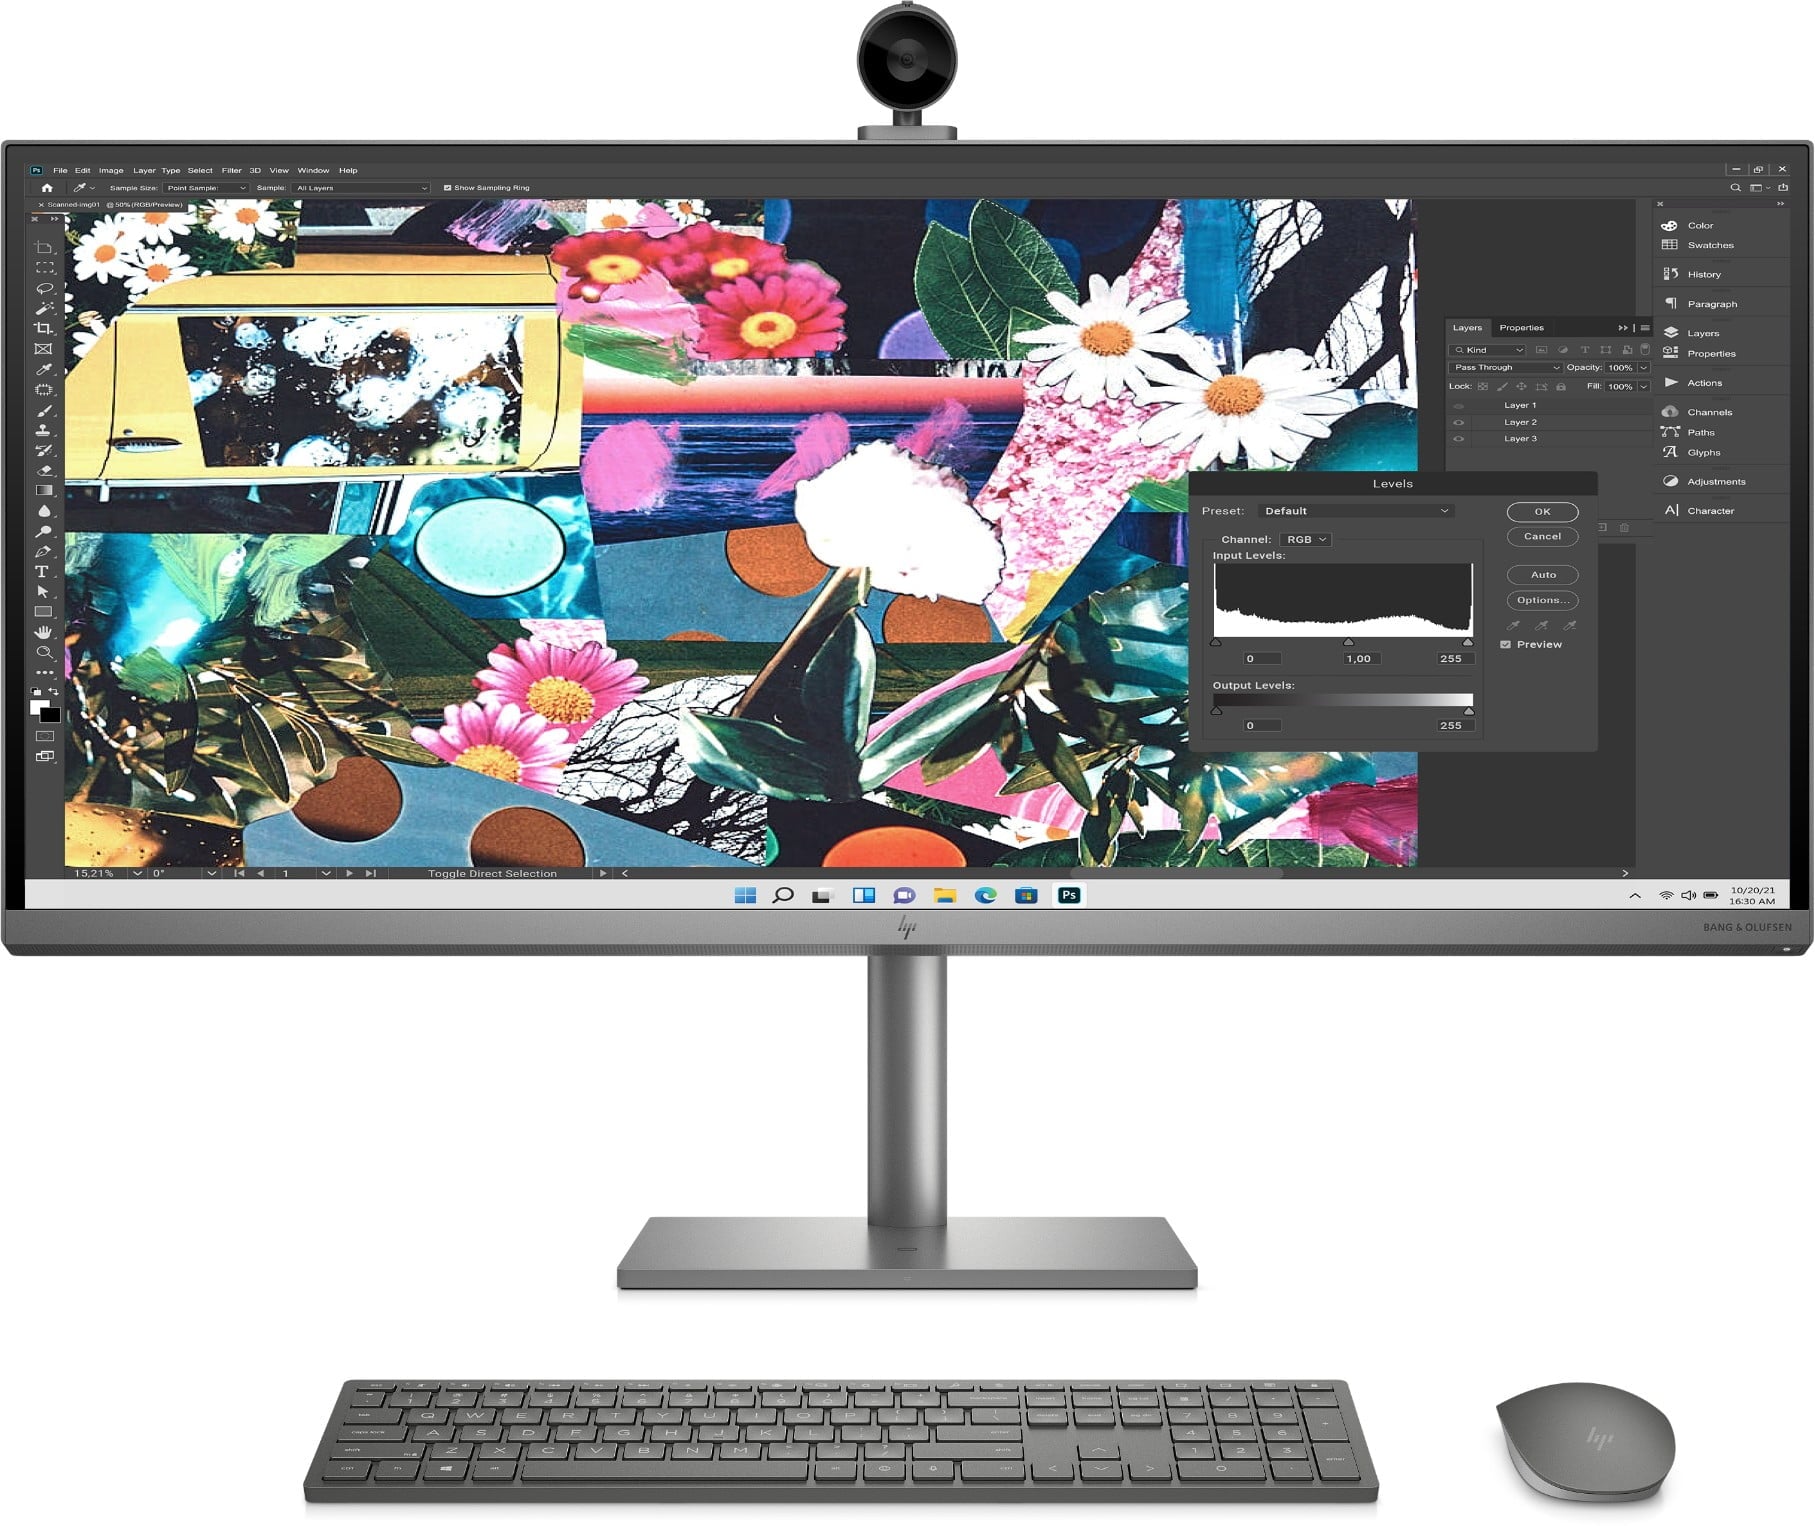 HP ENVY 34 All-in One | HP® Official Store